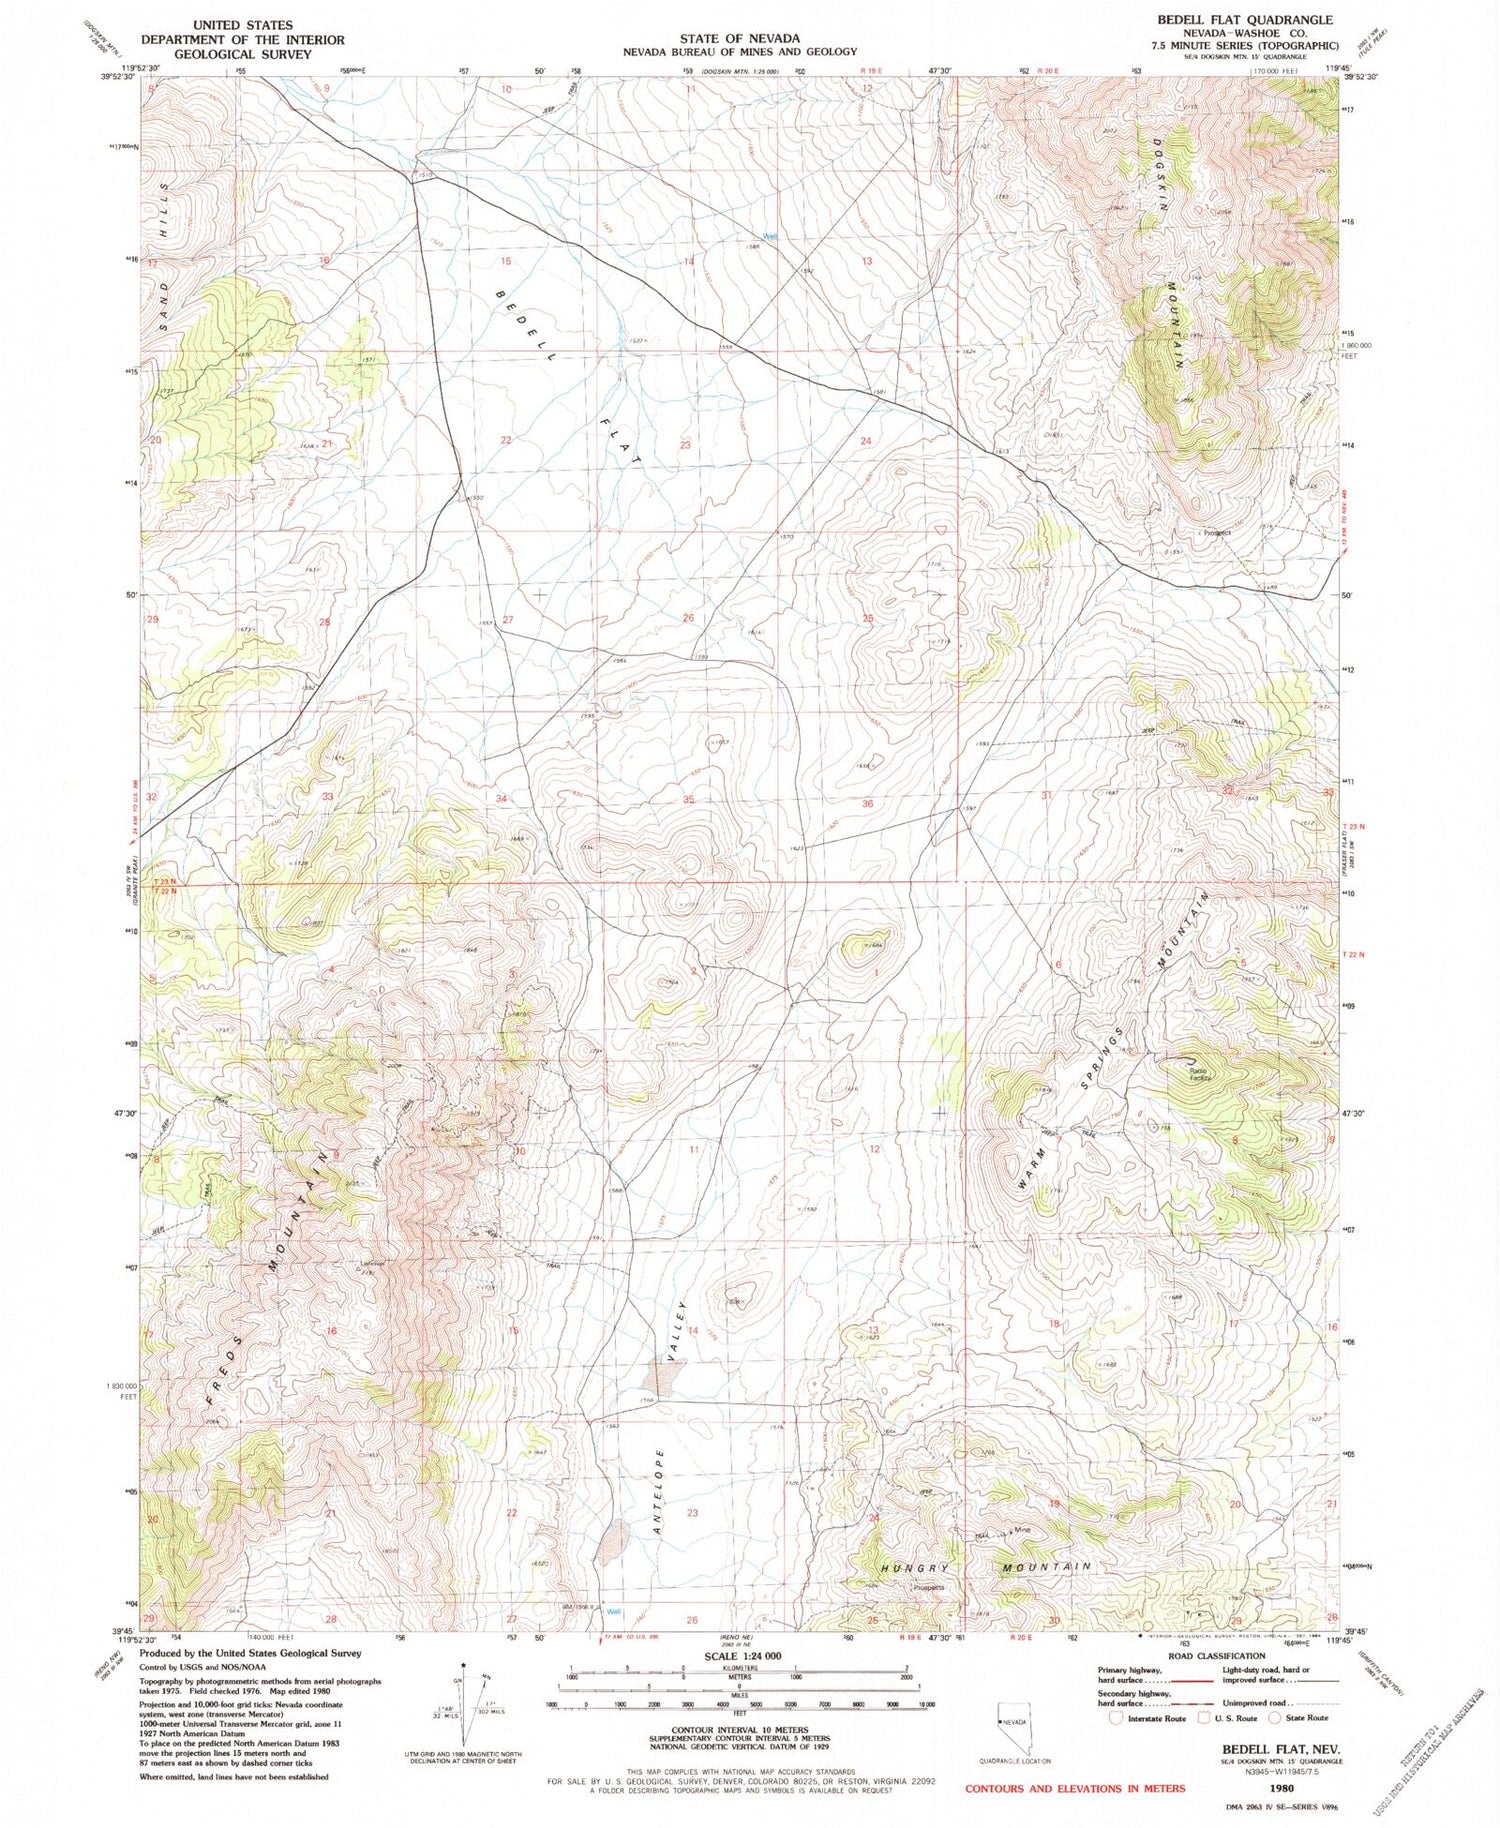 Classic USGS Bedell Flat Nevada 7.5'x7.5' Topo Map Image